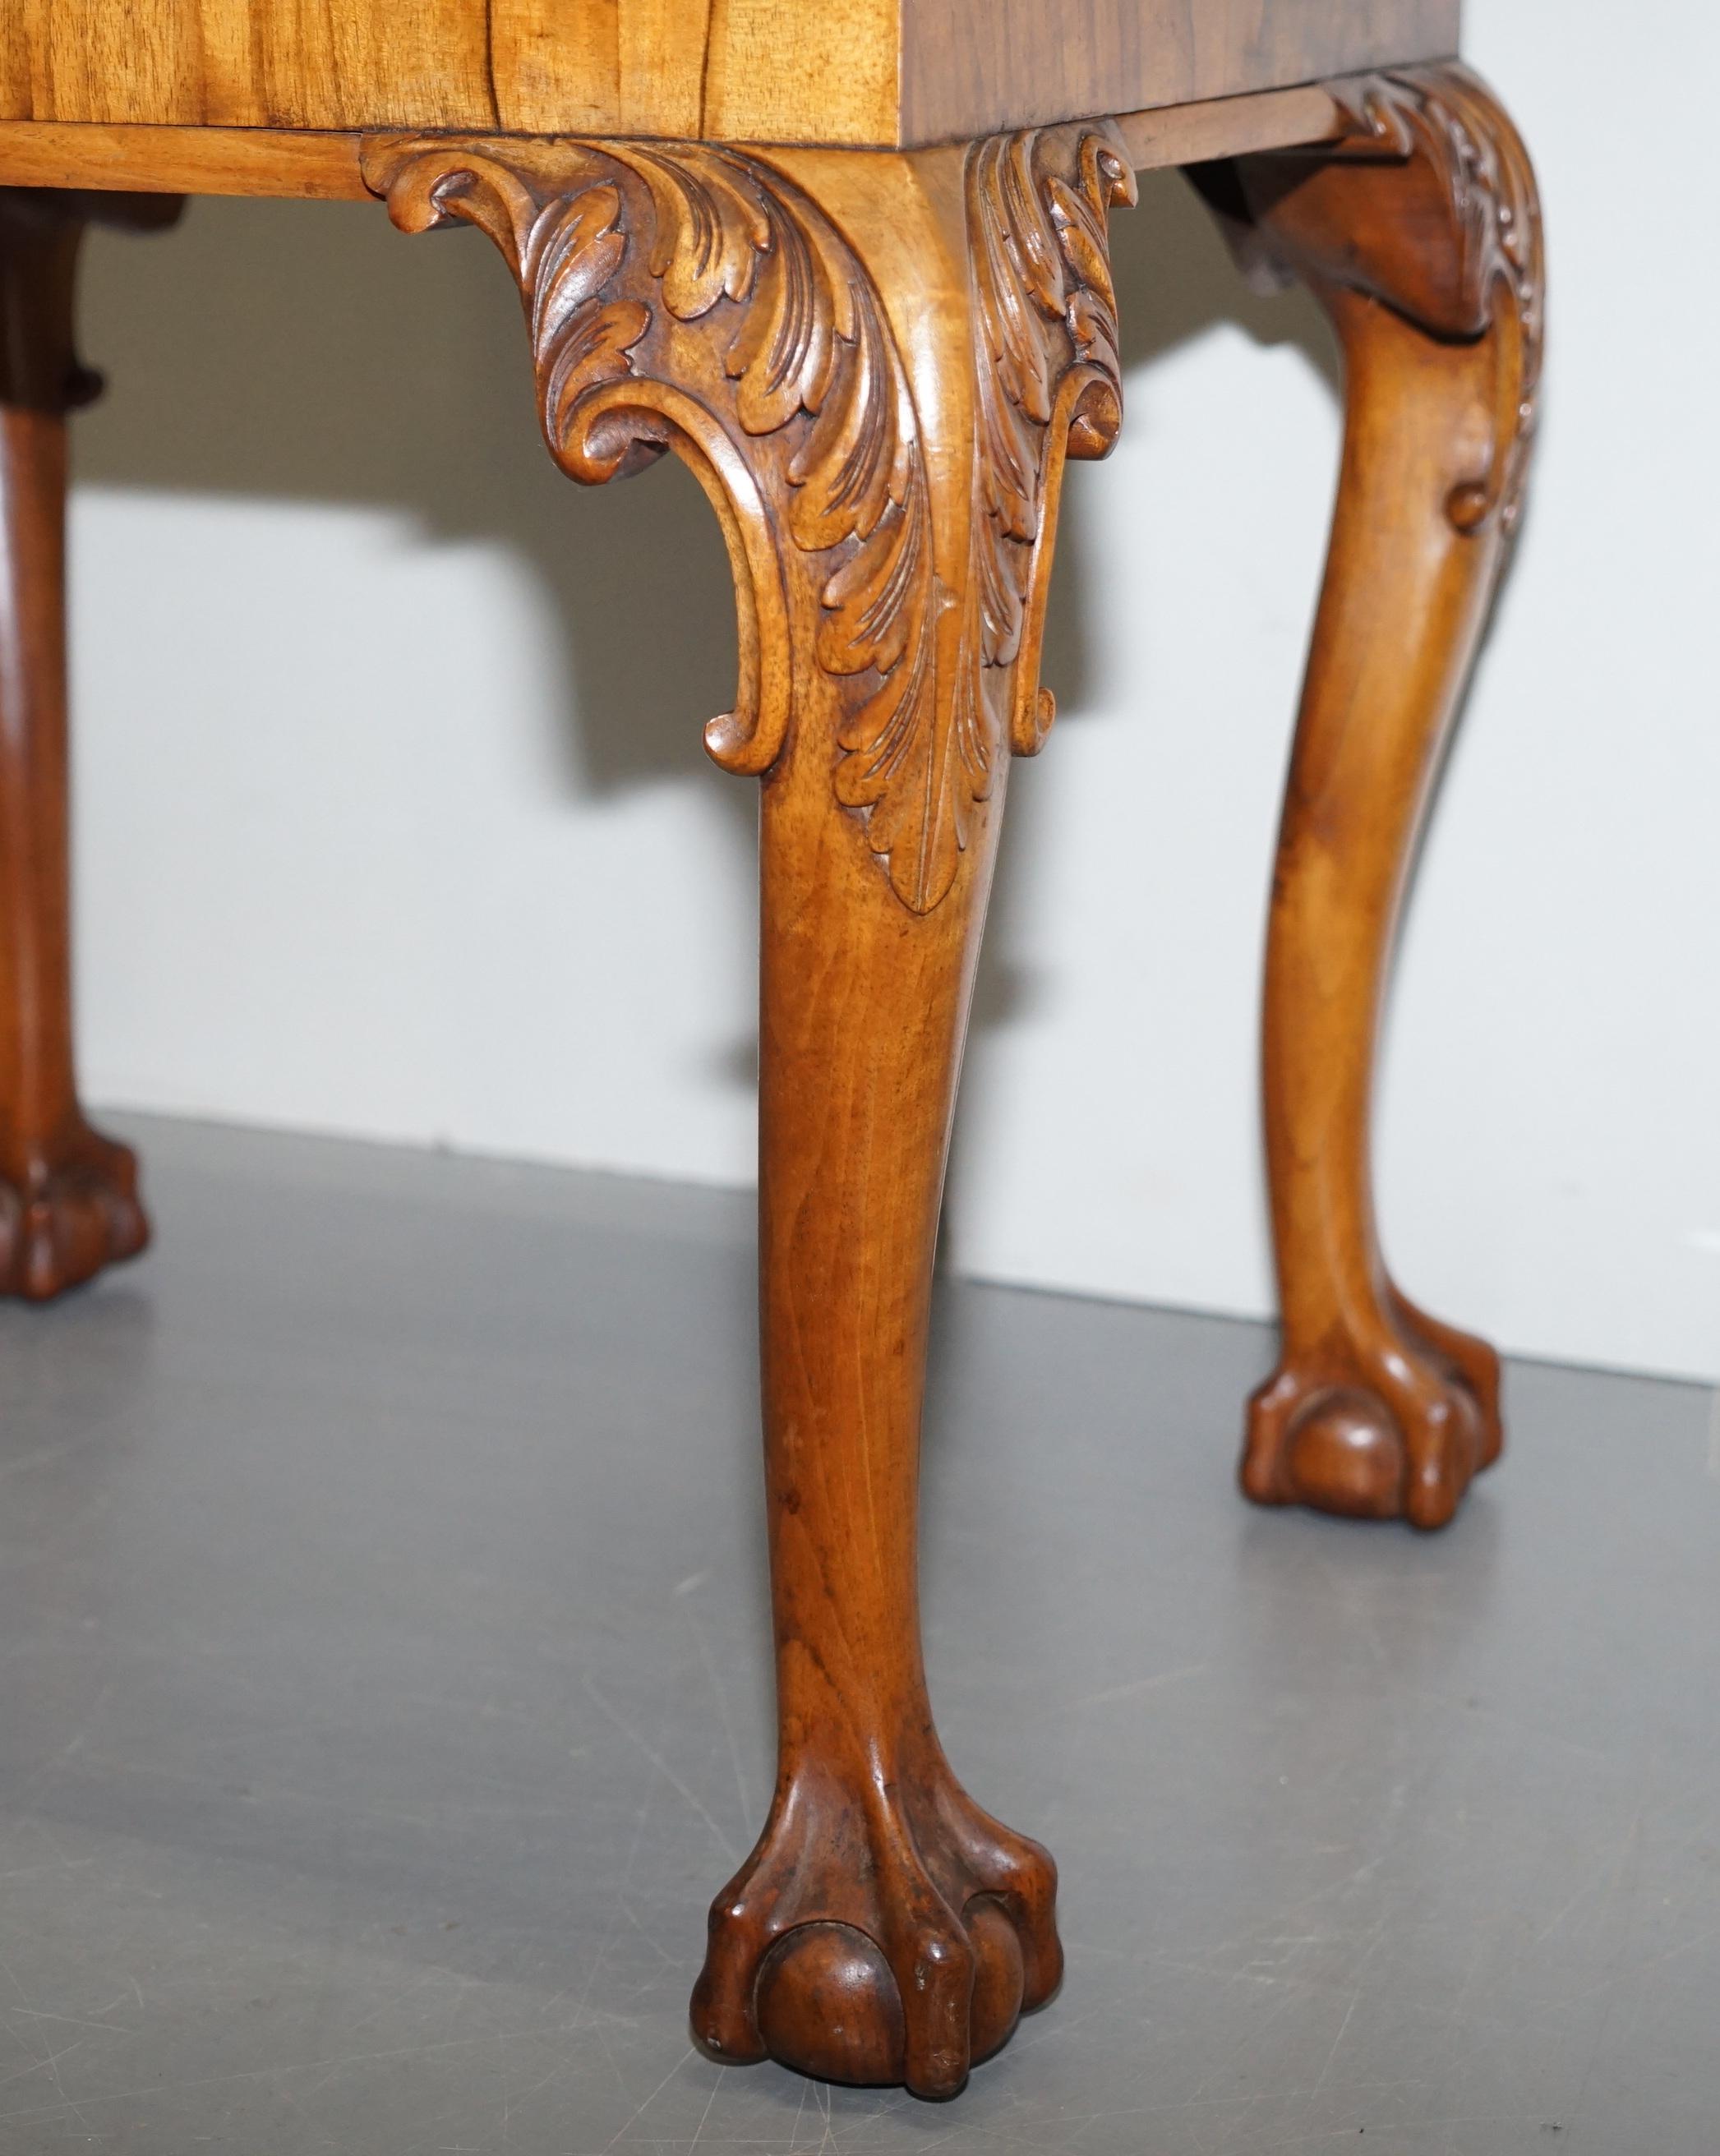 Hand-Crafted Original George III 1760 Hand Carved Claw & Ball Feet Piano Stool or Bench Seat